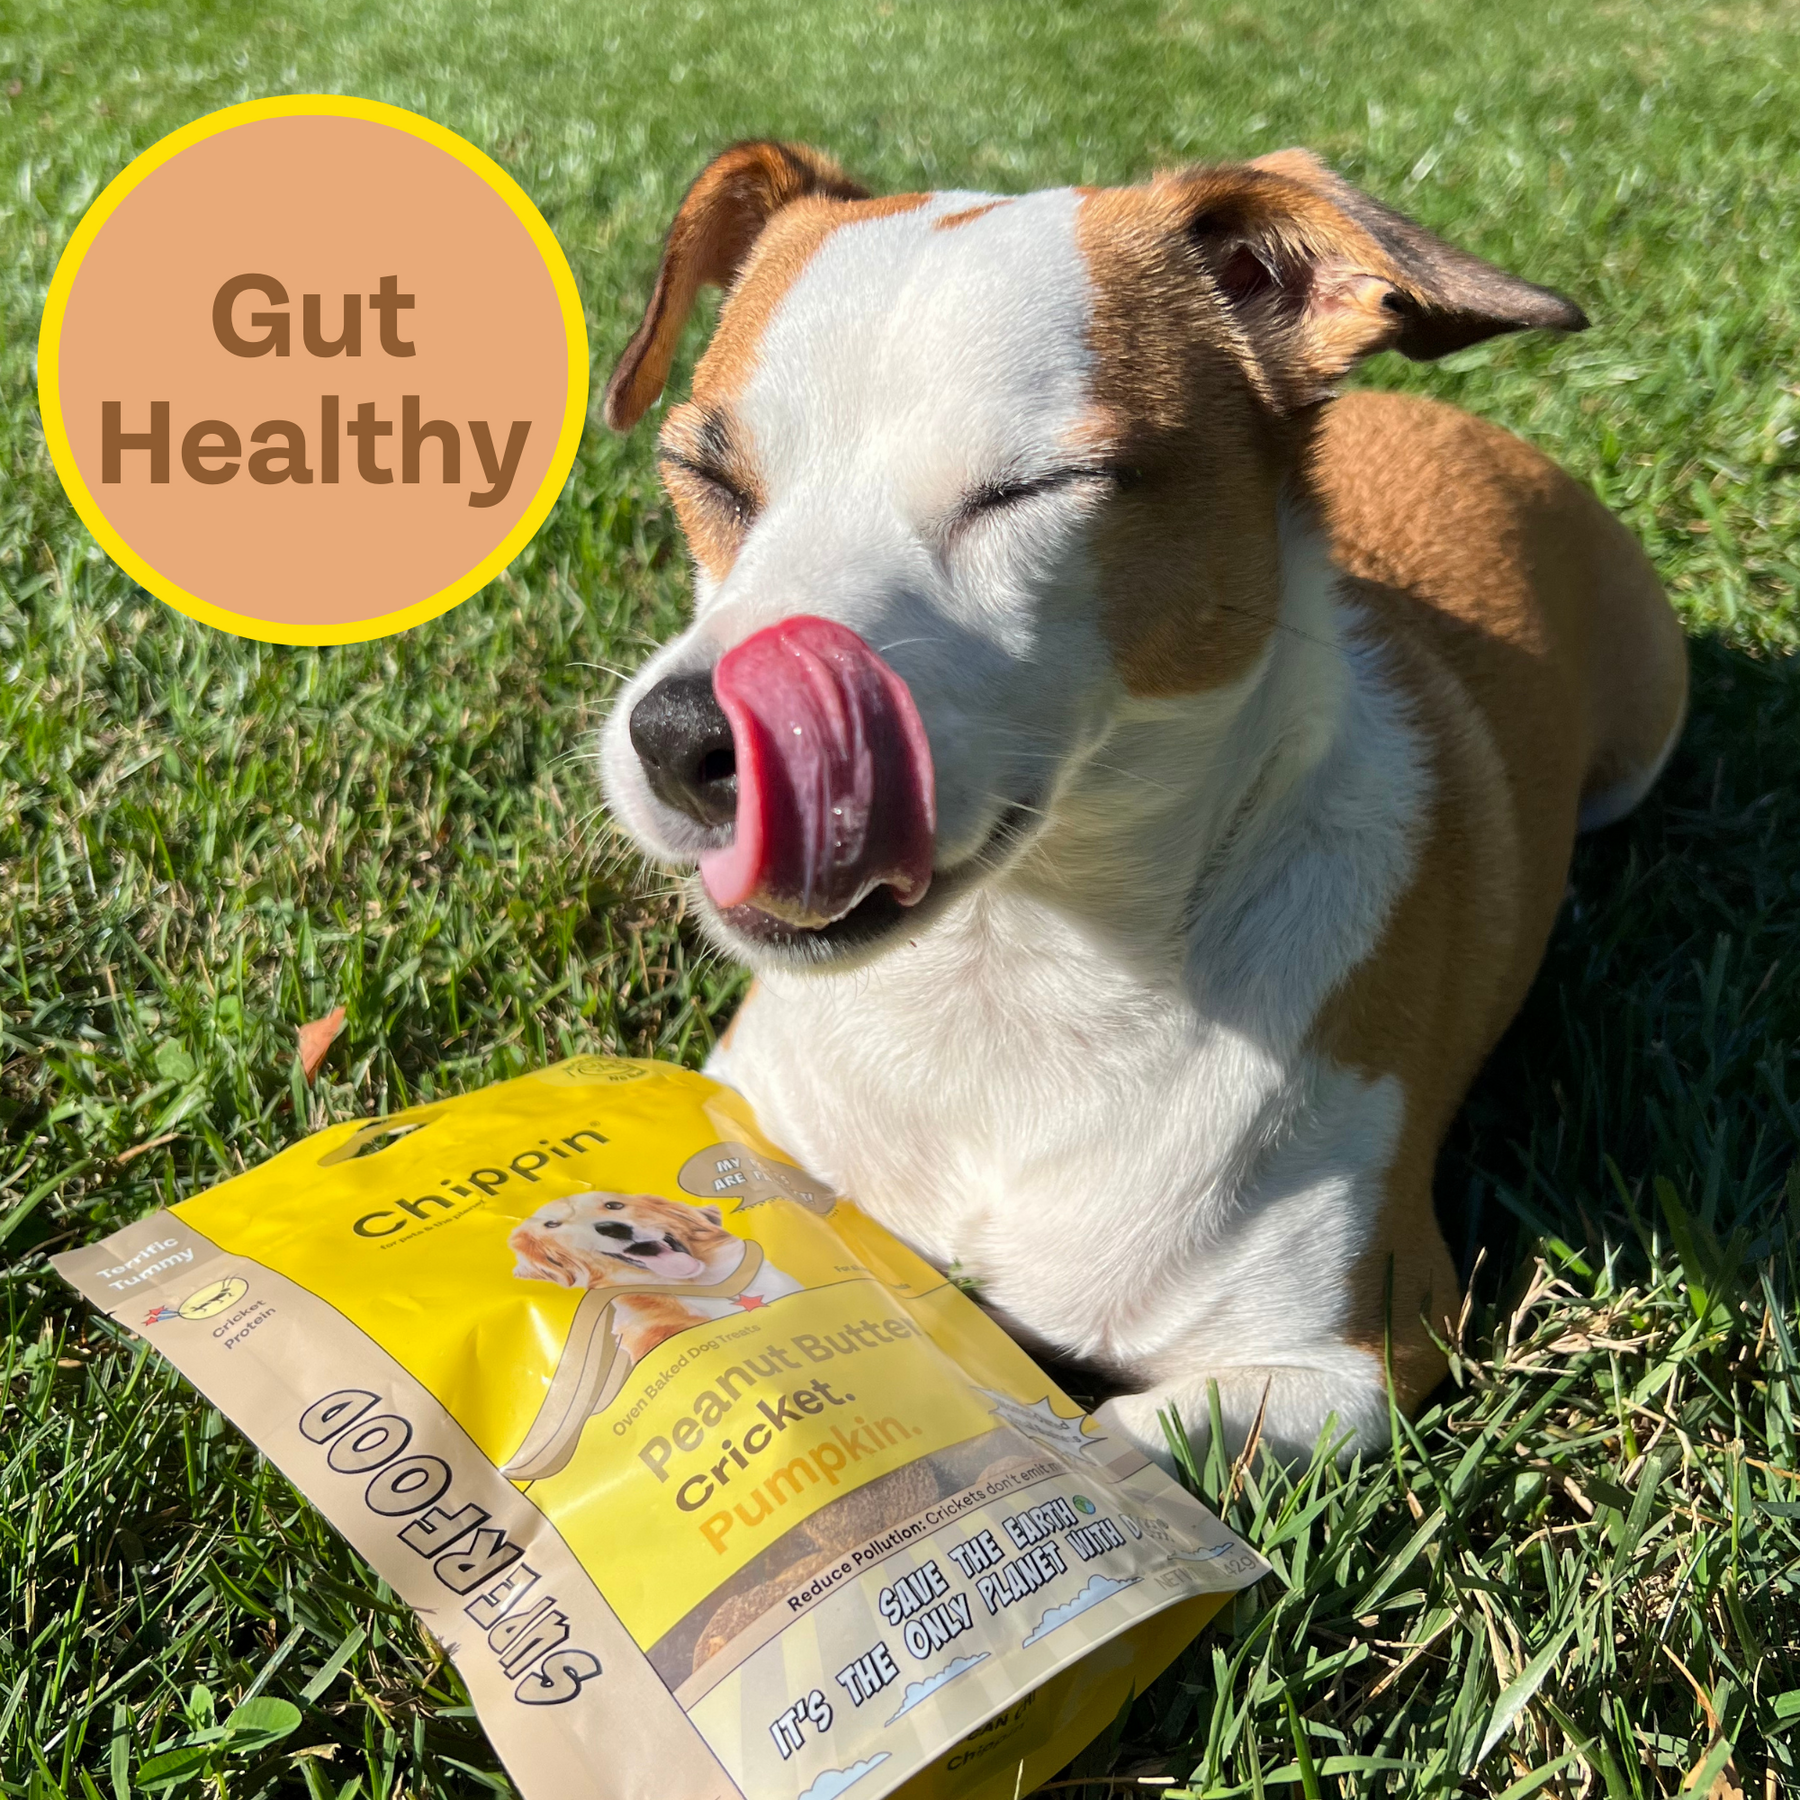 Dog licking his lips in the grass with a bag of gut healthy chippin treats at his feet.